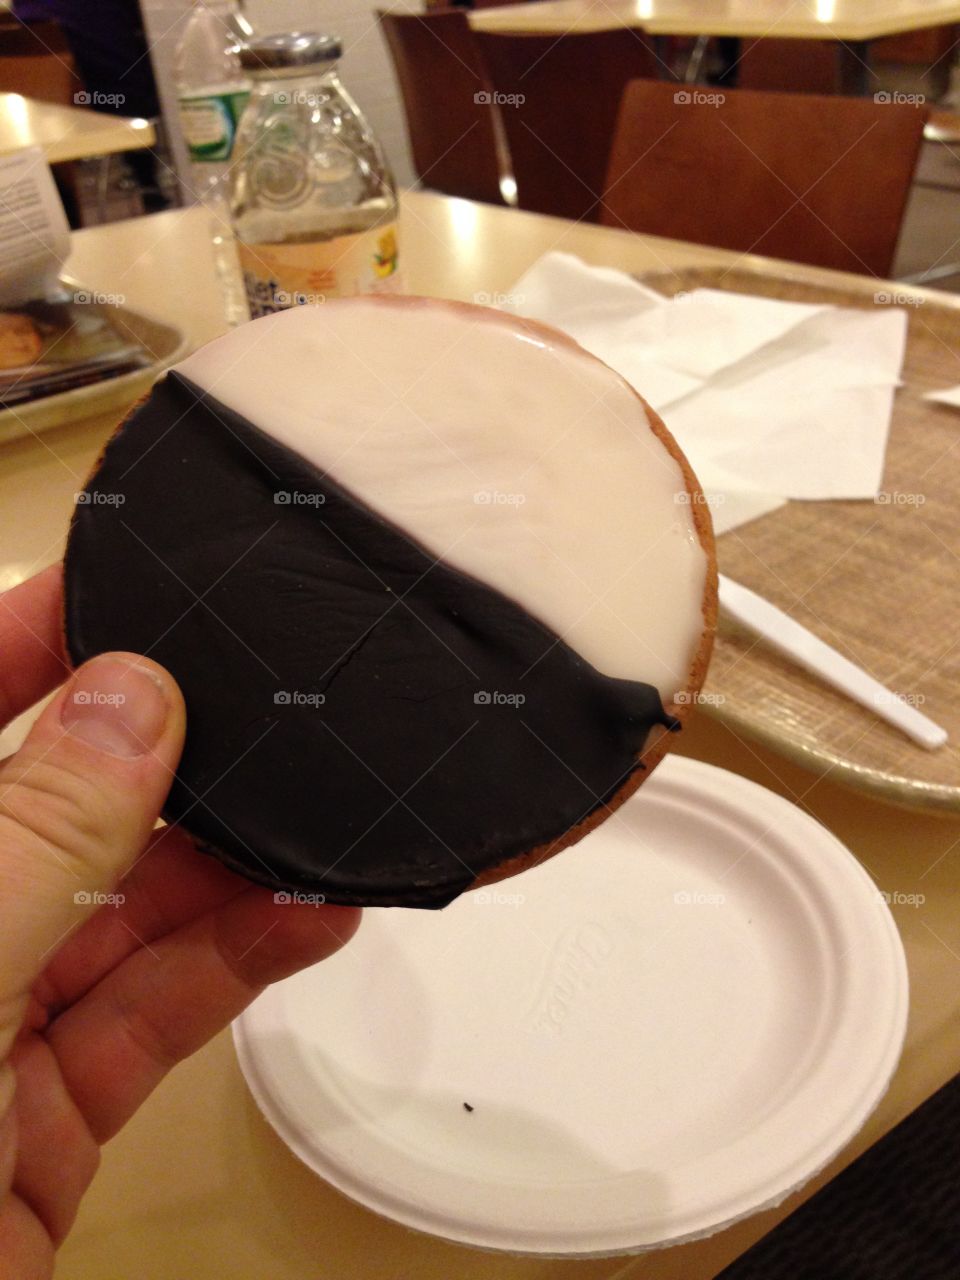 The "Seinfeld cookie"